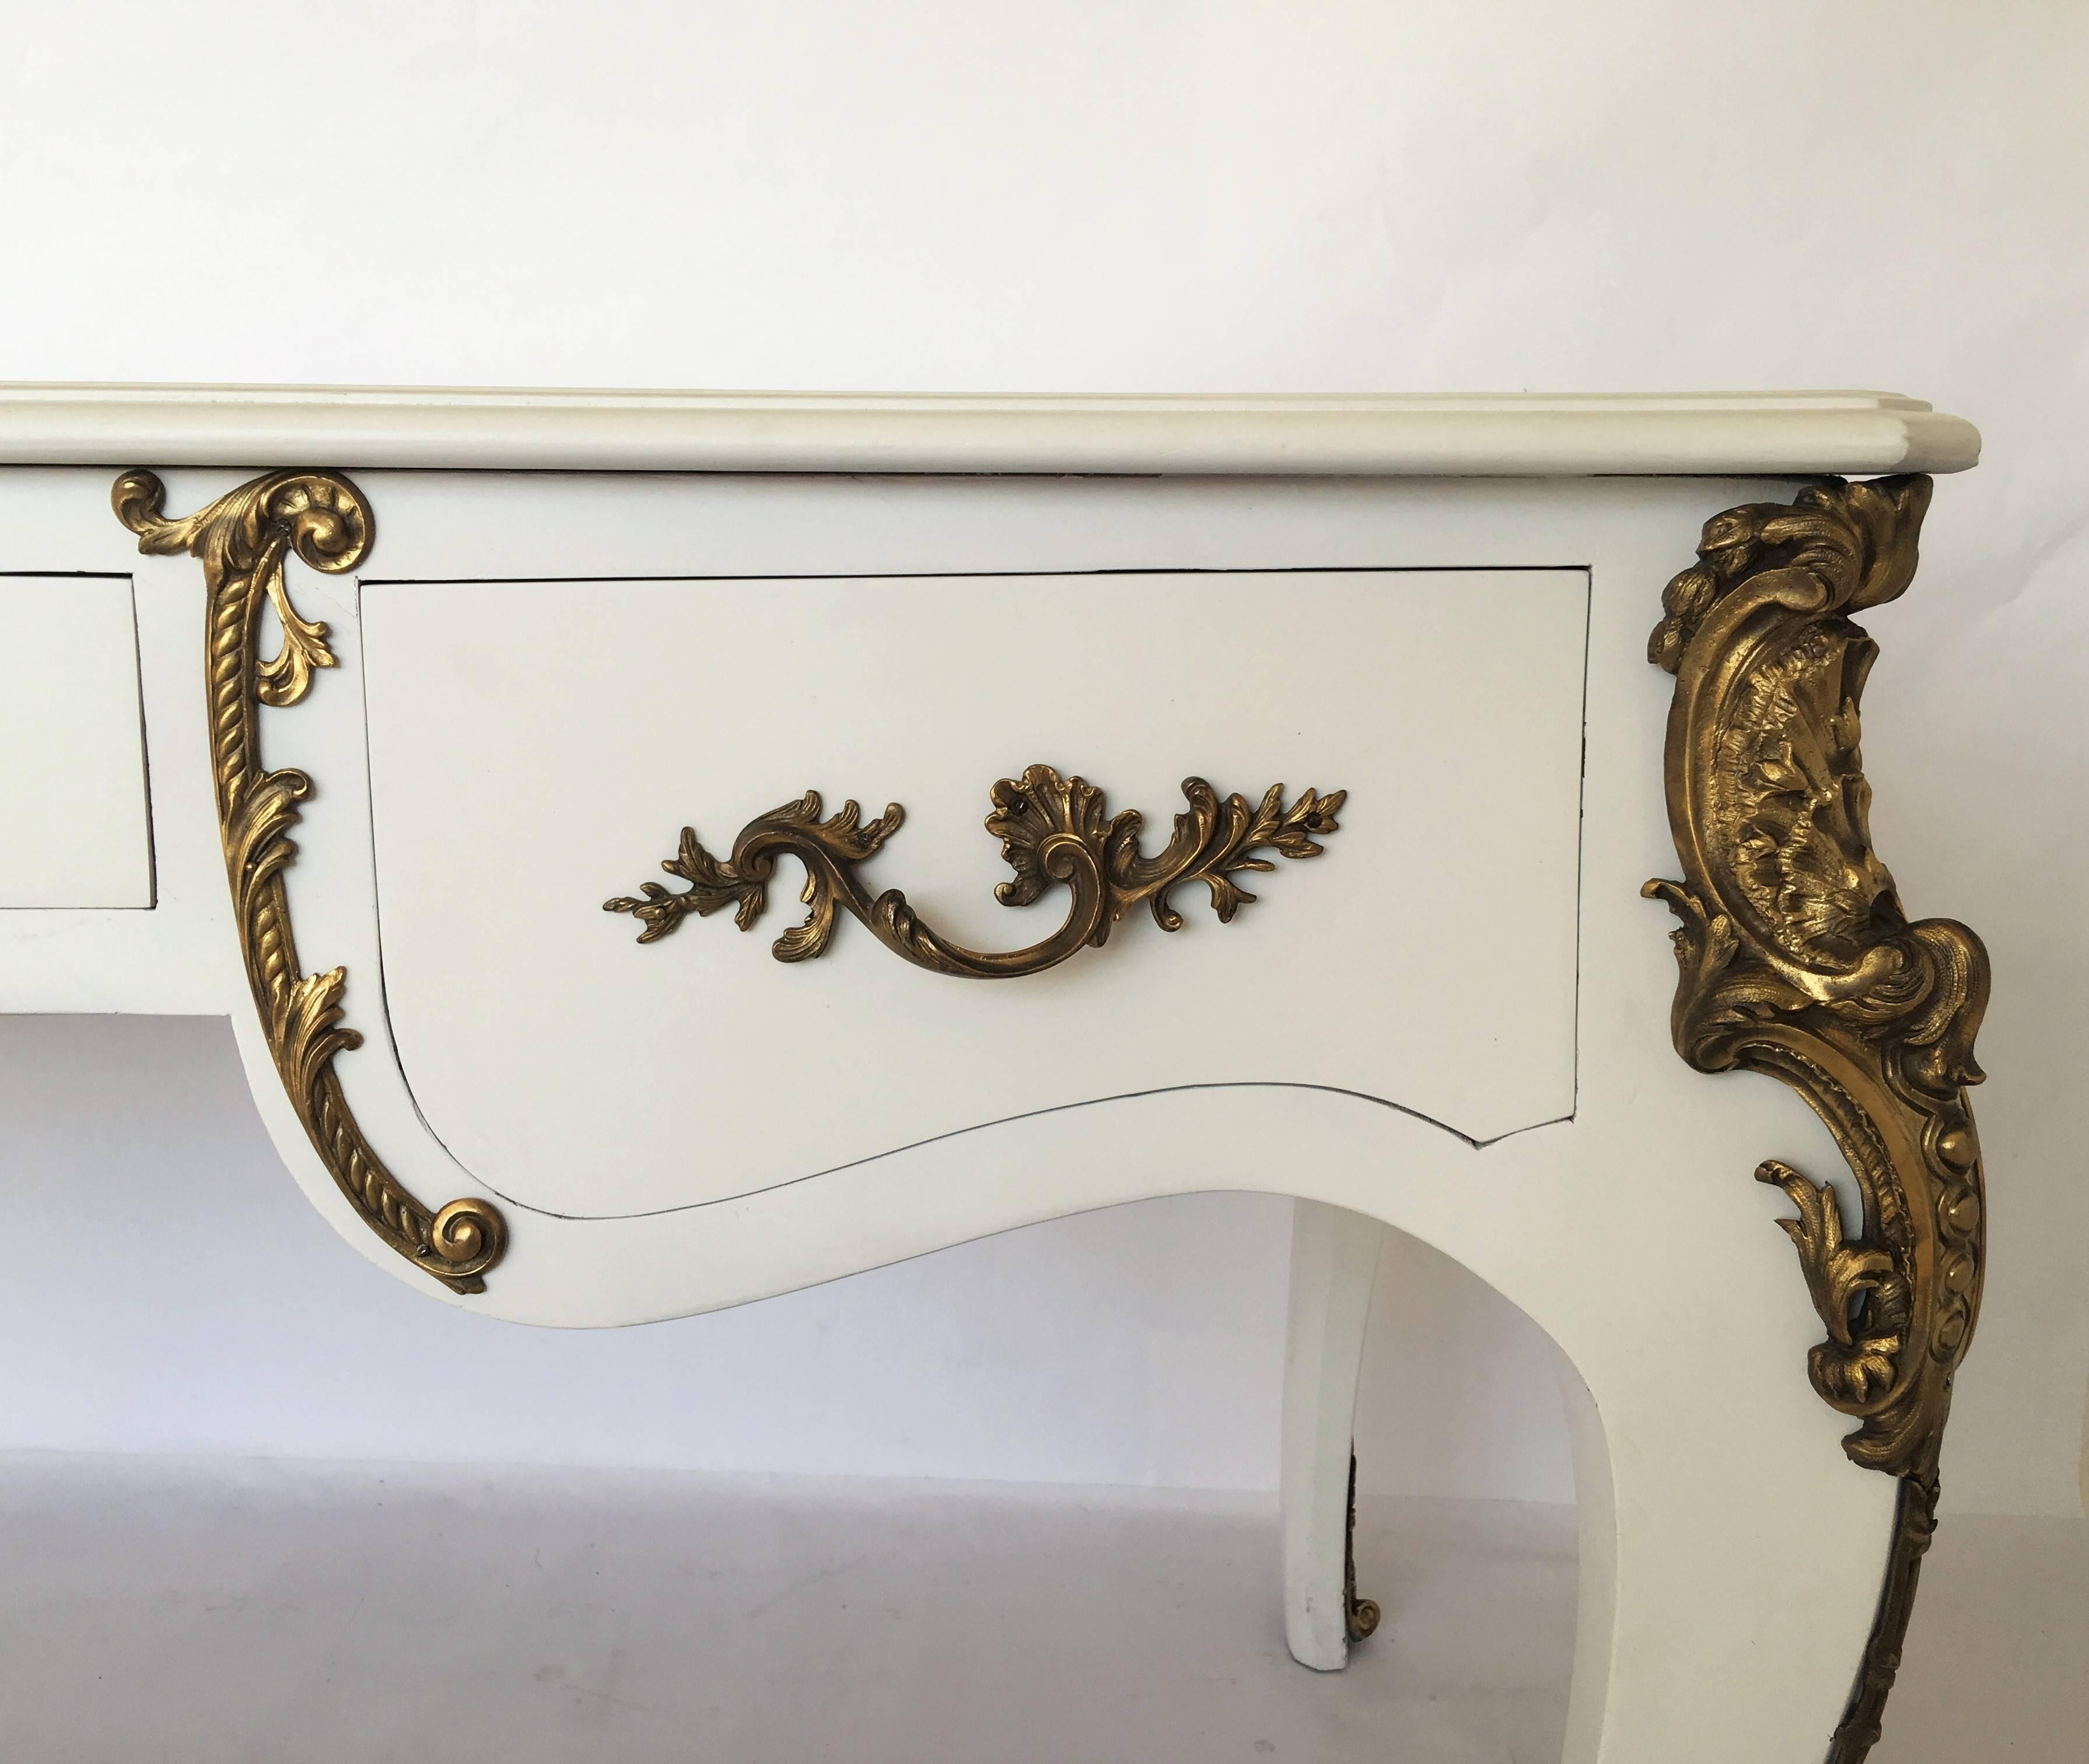 Louis XV Style Lacquered and Gilt Bronze-Mounted Bureau Plat In Excellent Condition For Sale In Dallas, TX